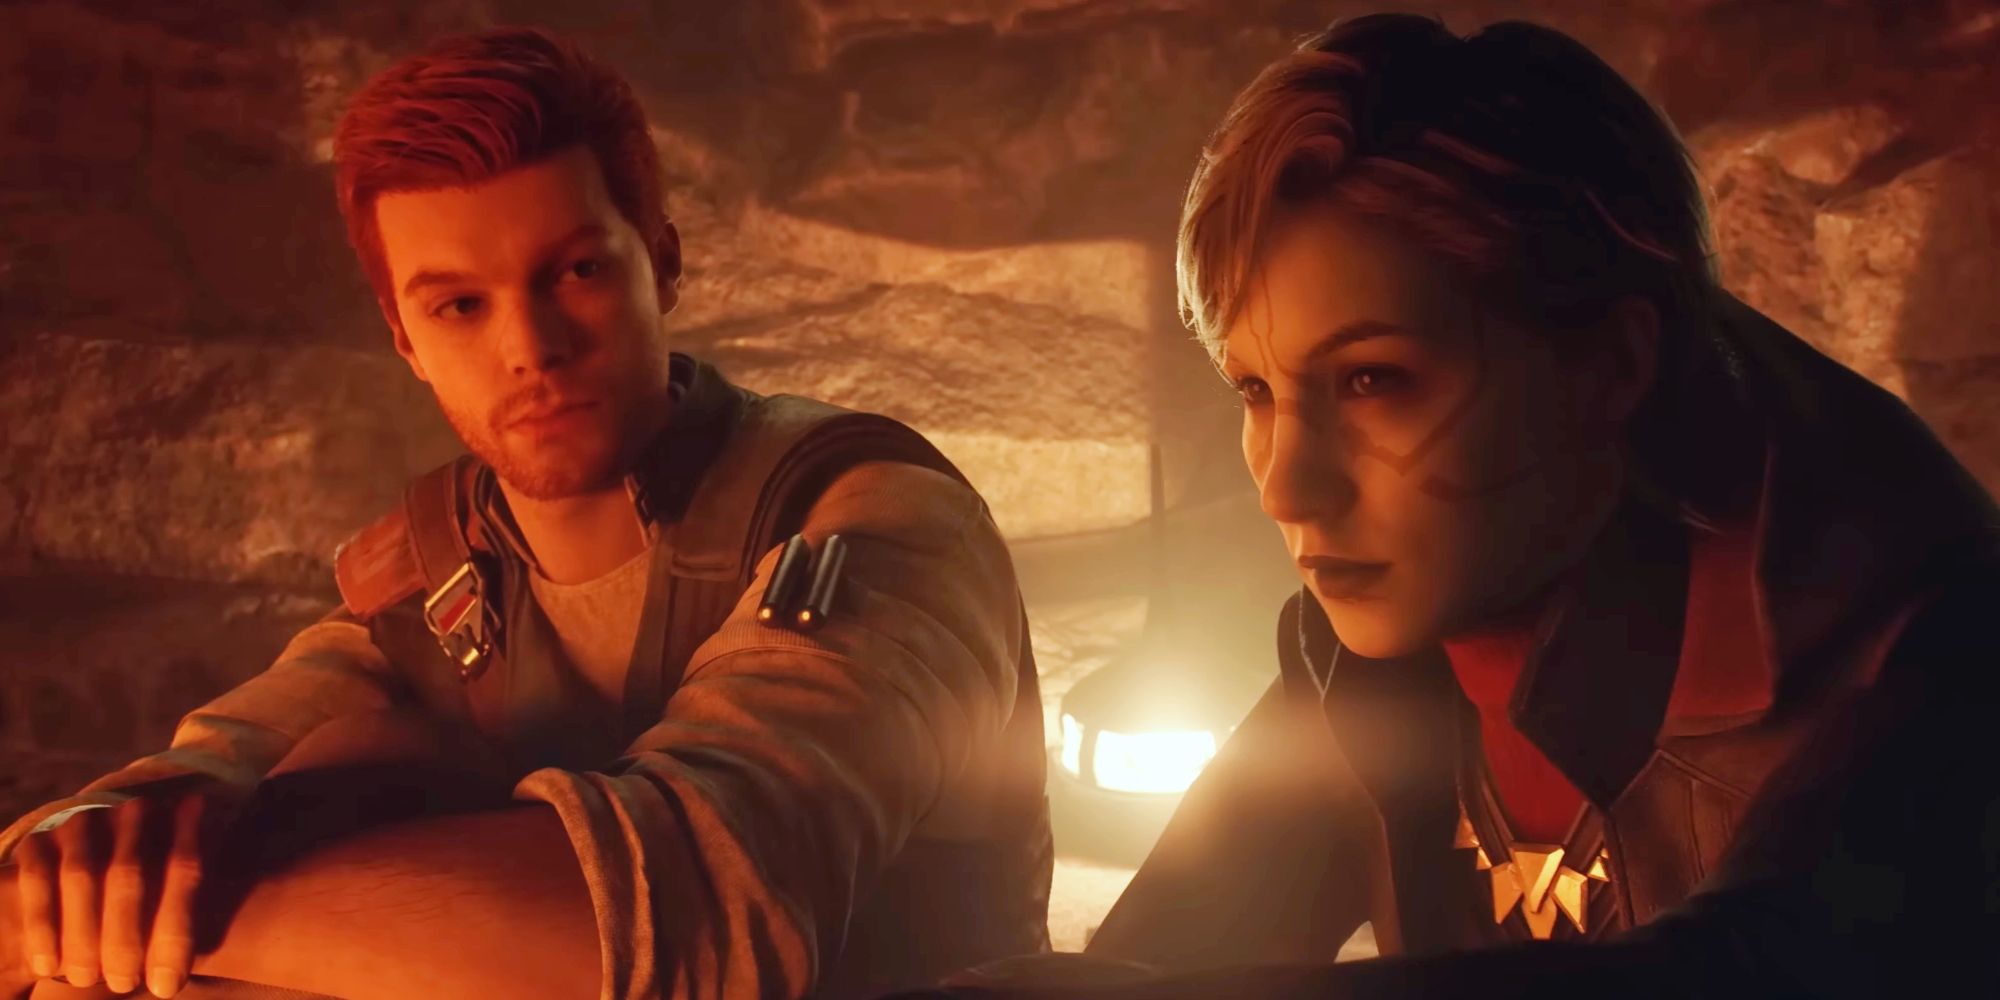 Cal and Merrin in Star Wars Jedi: Survivor, sitting next to each other in what appears to be some sort of cave with a bright light behind them.